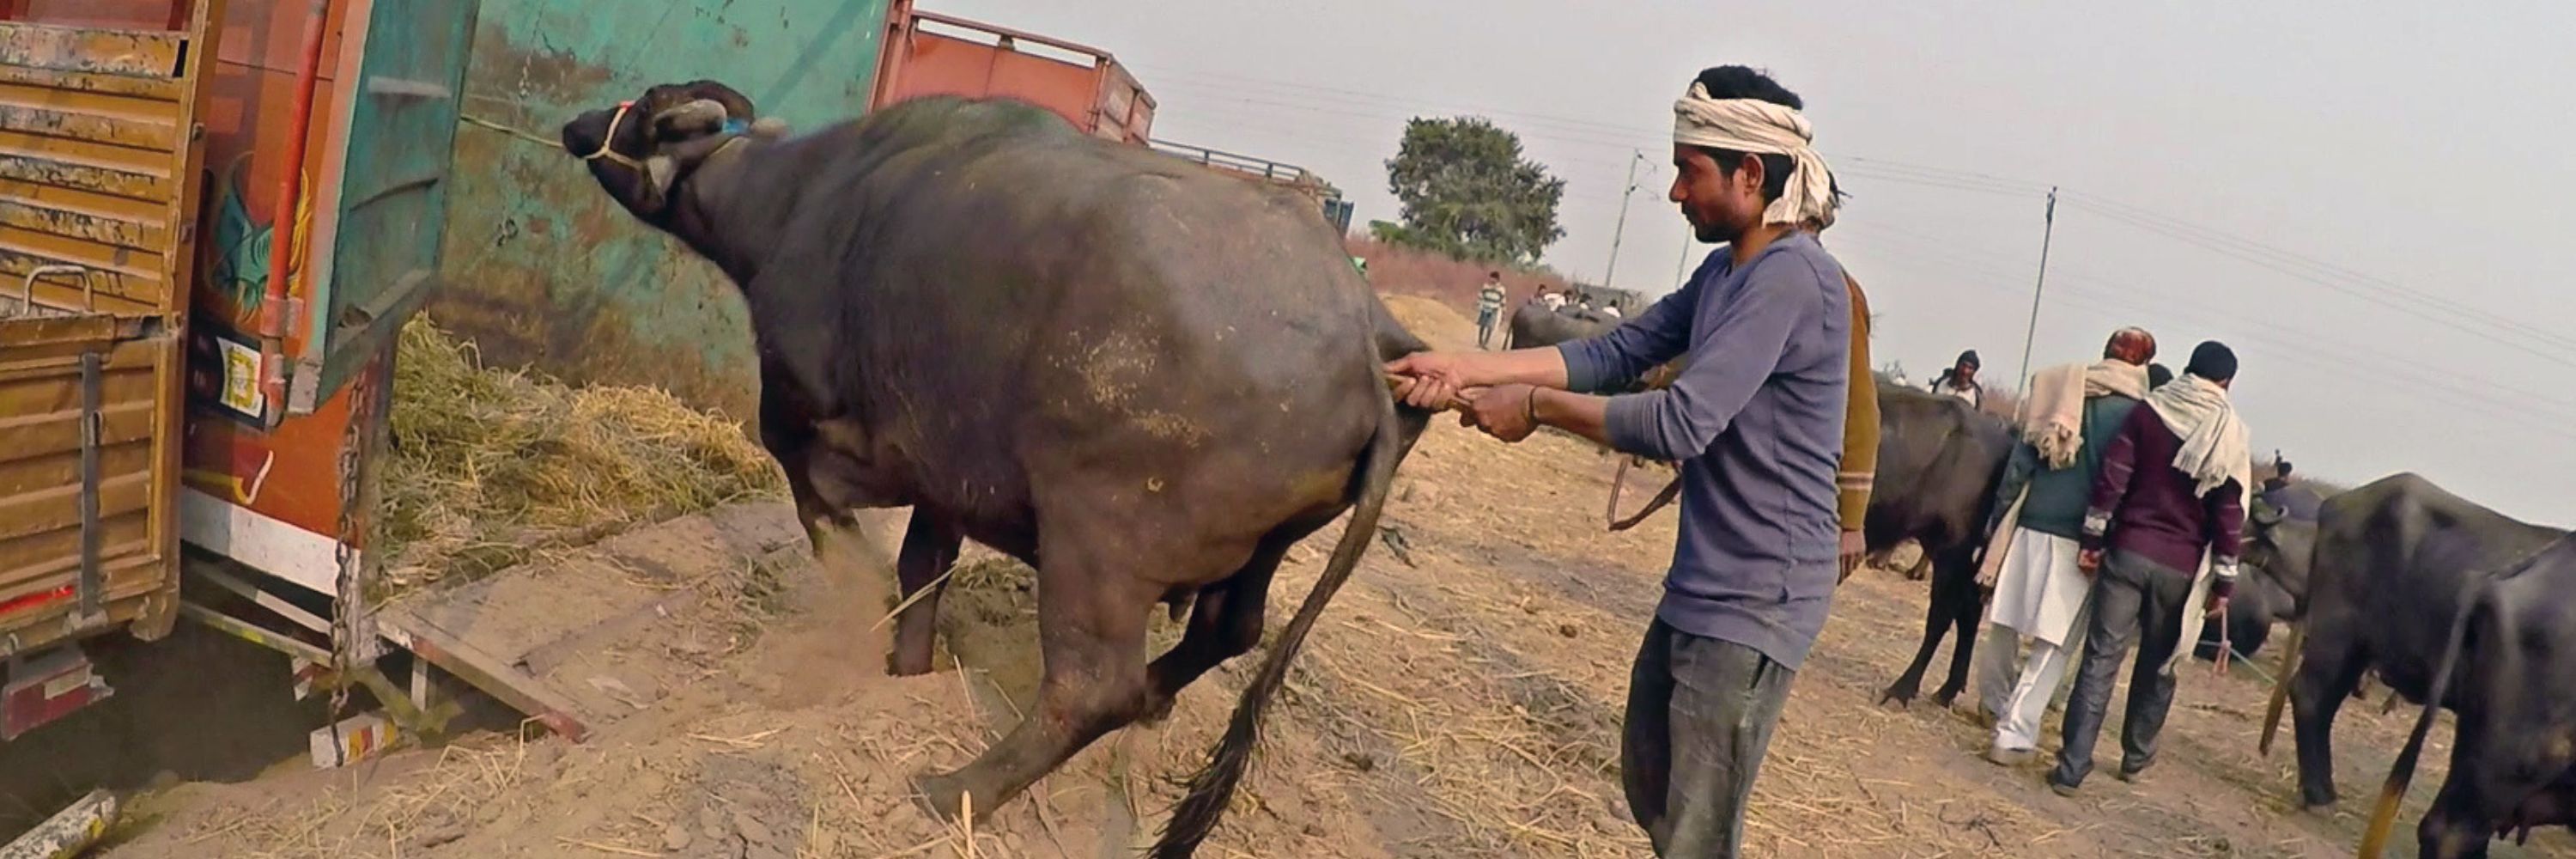 a buffalo being forced onto a transport truck to slaughter while a worker inserts a stick into her genitals to induce pain and make her move